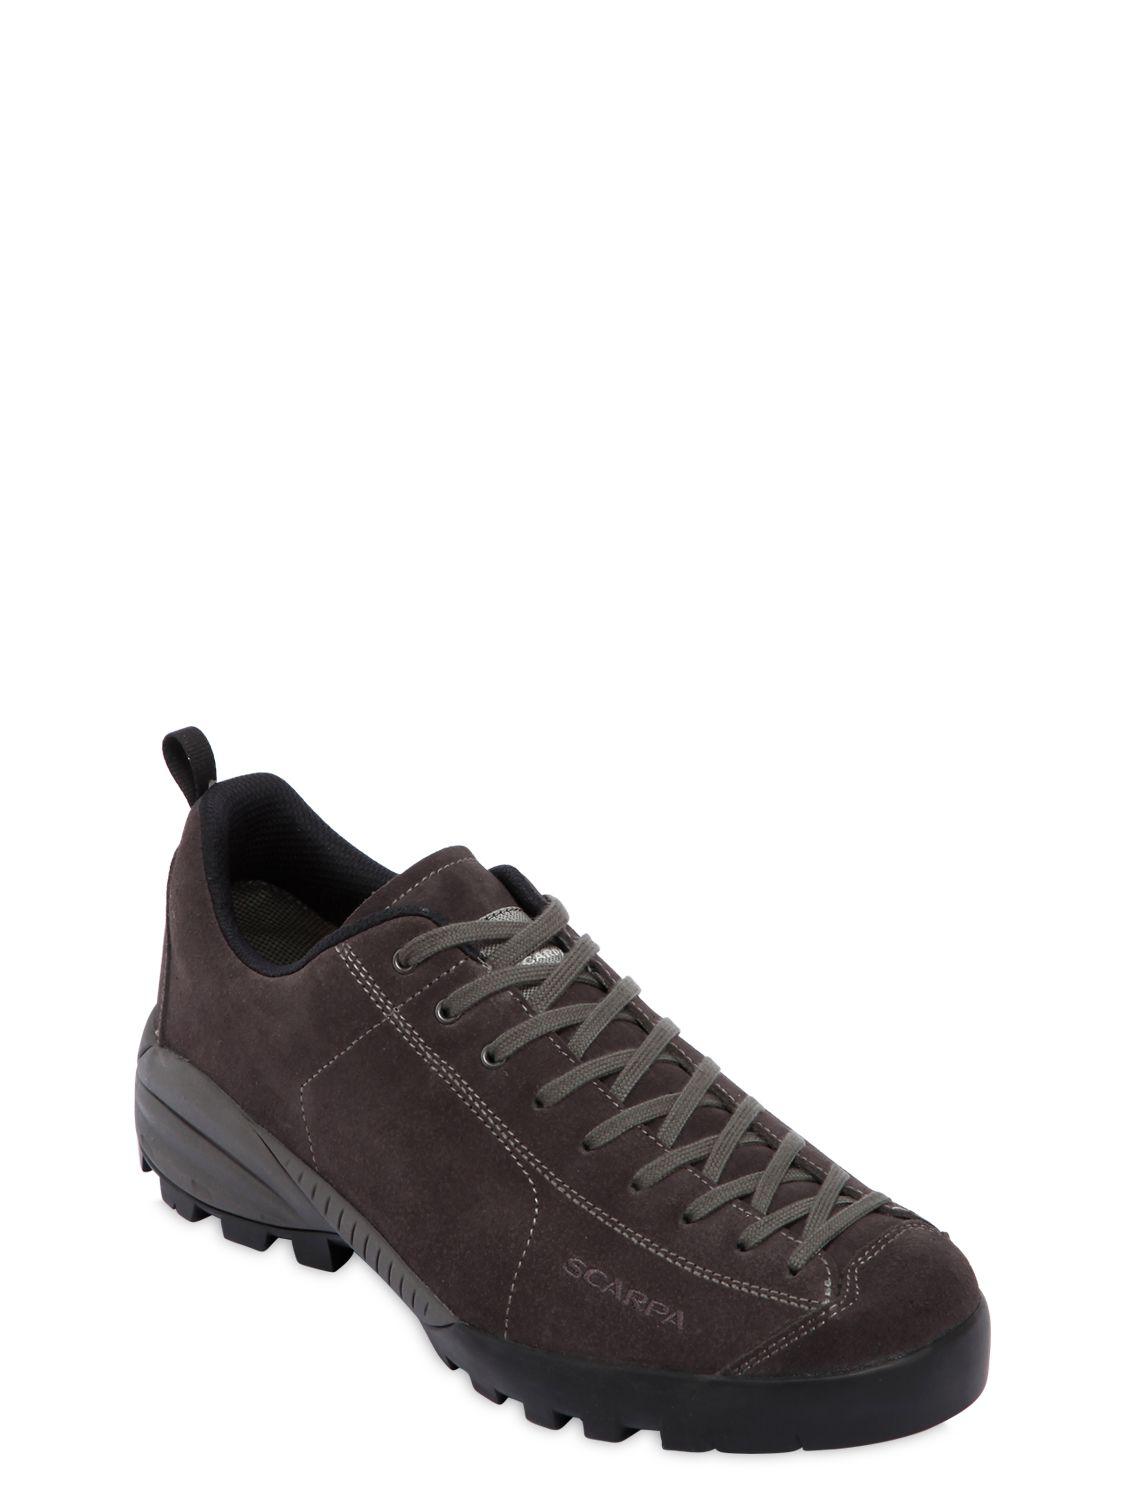 SCARPA Mojito City Suede Gore-tex Sneakers in Brown for Men - Lyst